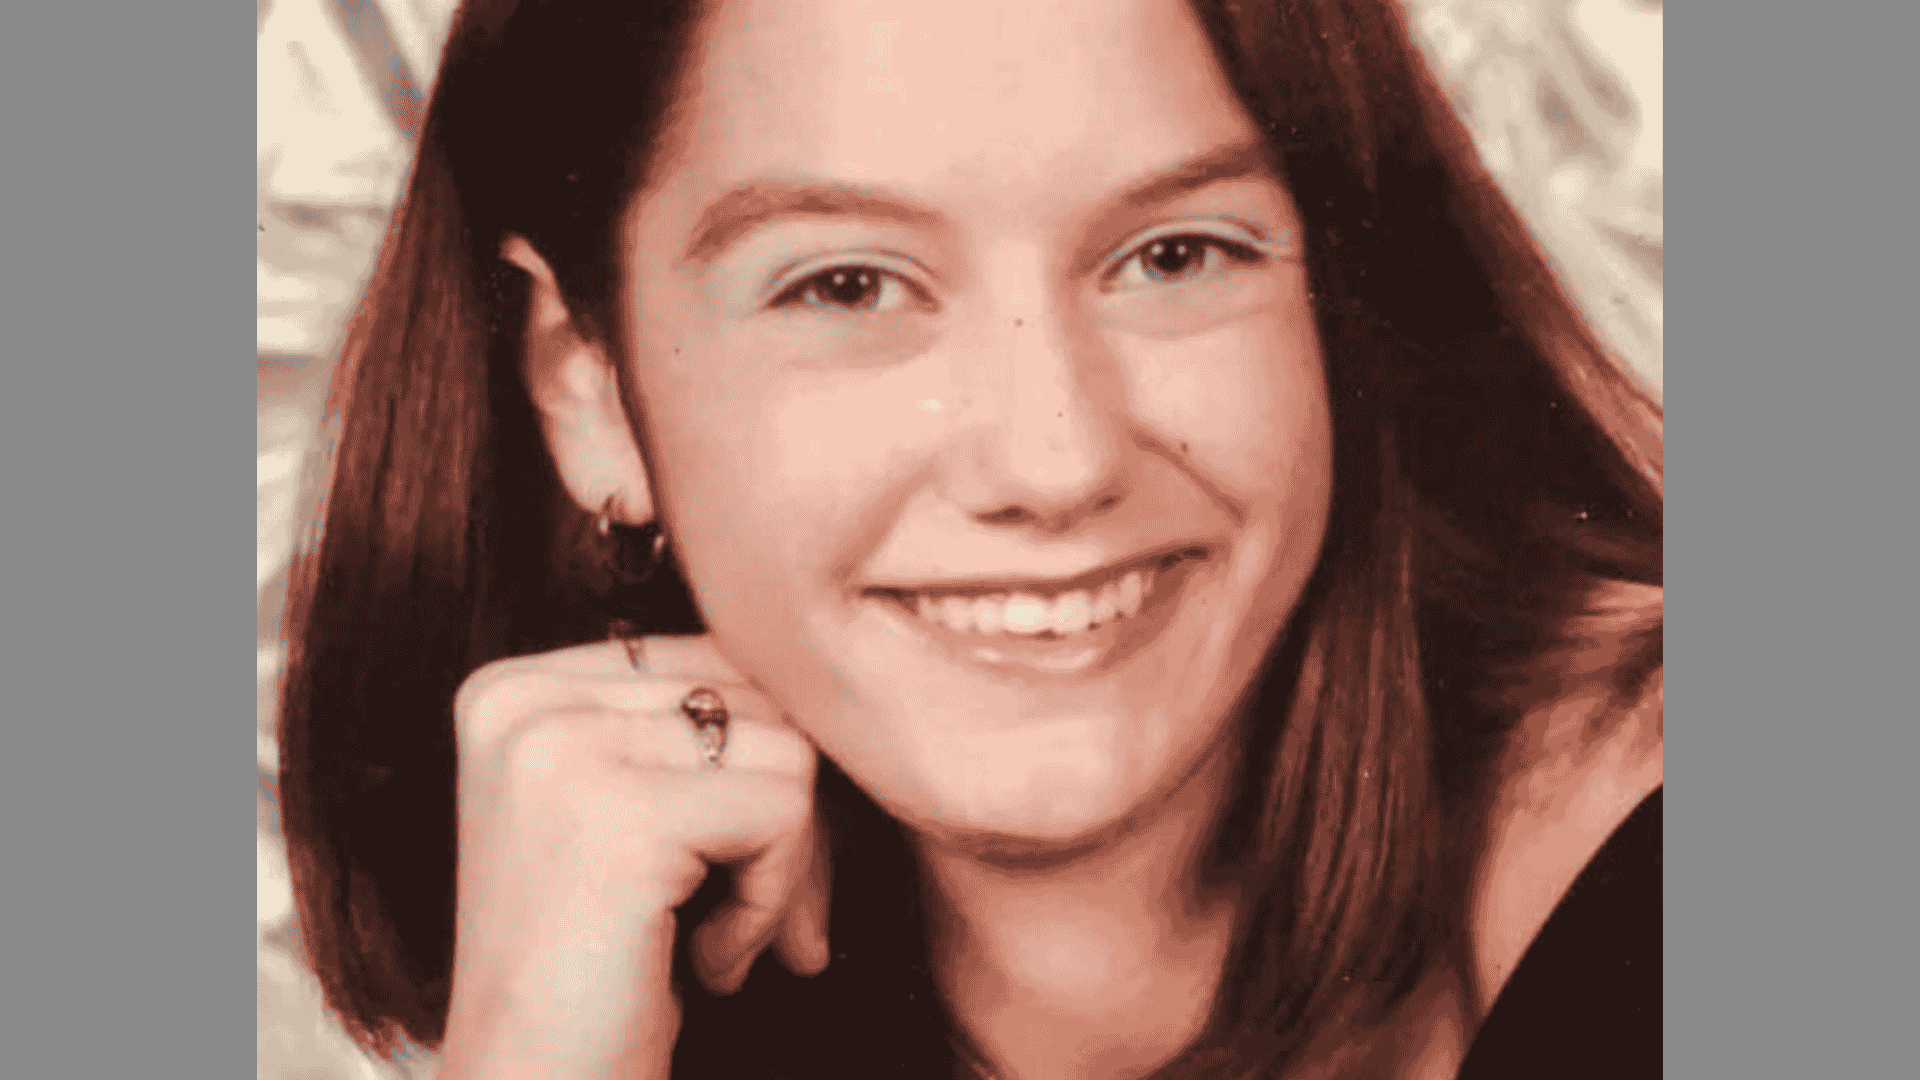 The Unsolved Murder of Courtney Coco Continues to Haunt Her Family